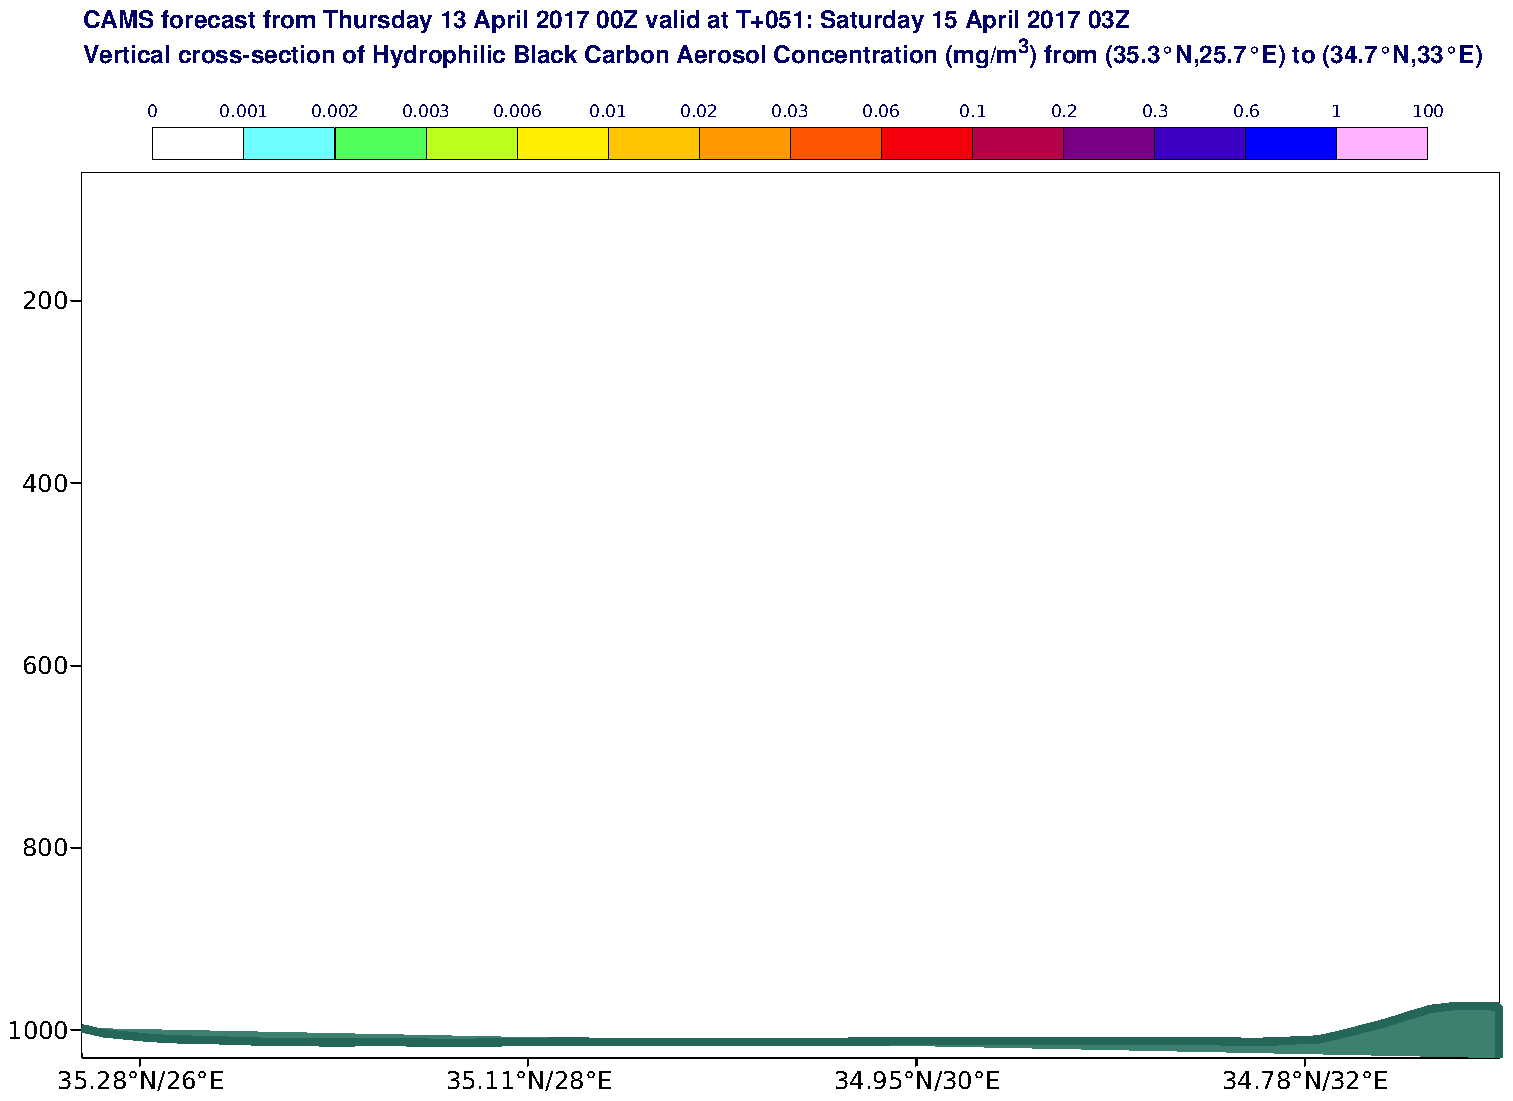 Vertical cross-section of Hydrophilic Black Carbon Aerosol Concentration (mg/m3) valid at T51 - 2017-04-15 03:00